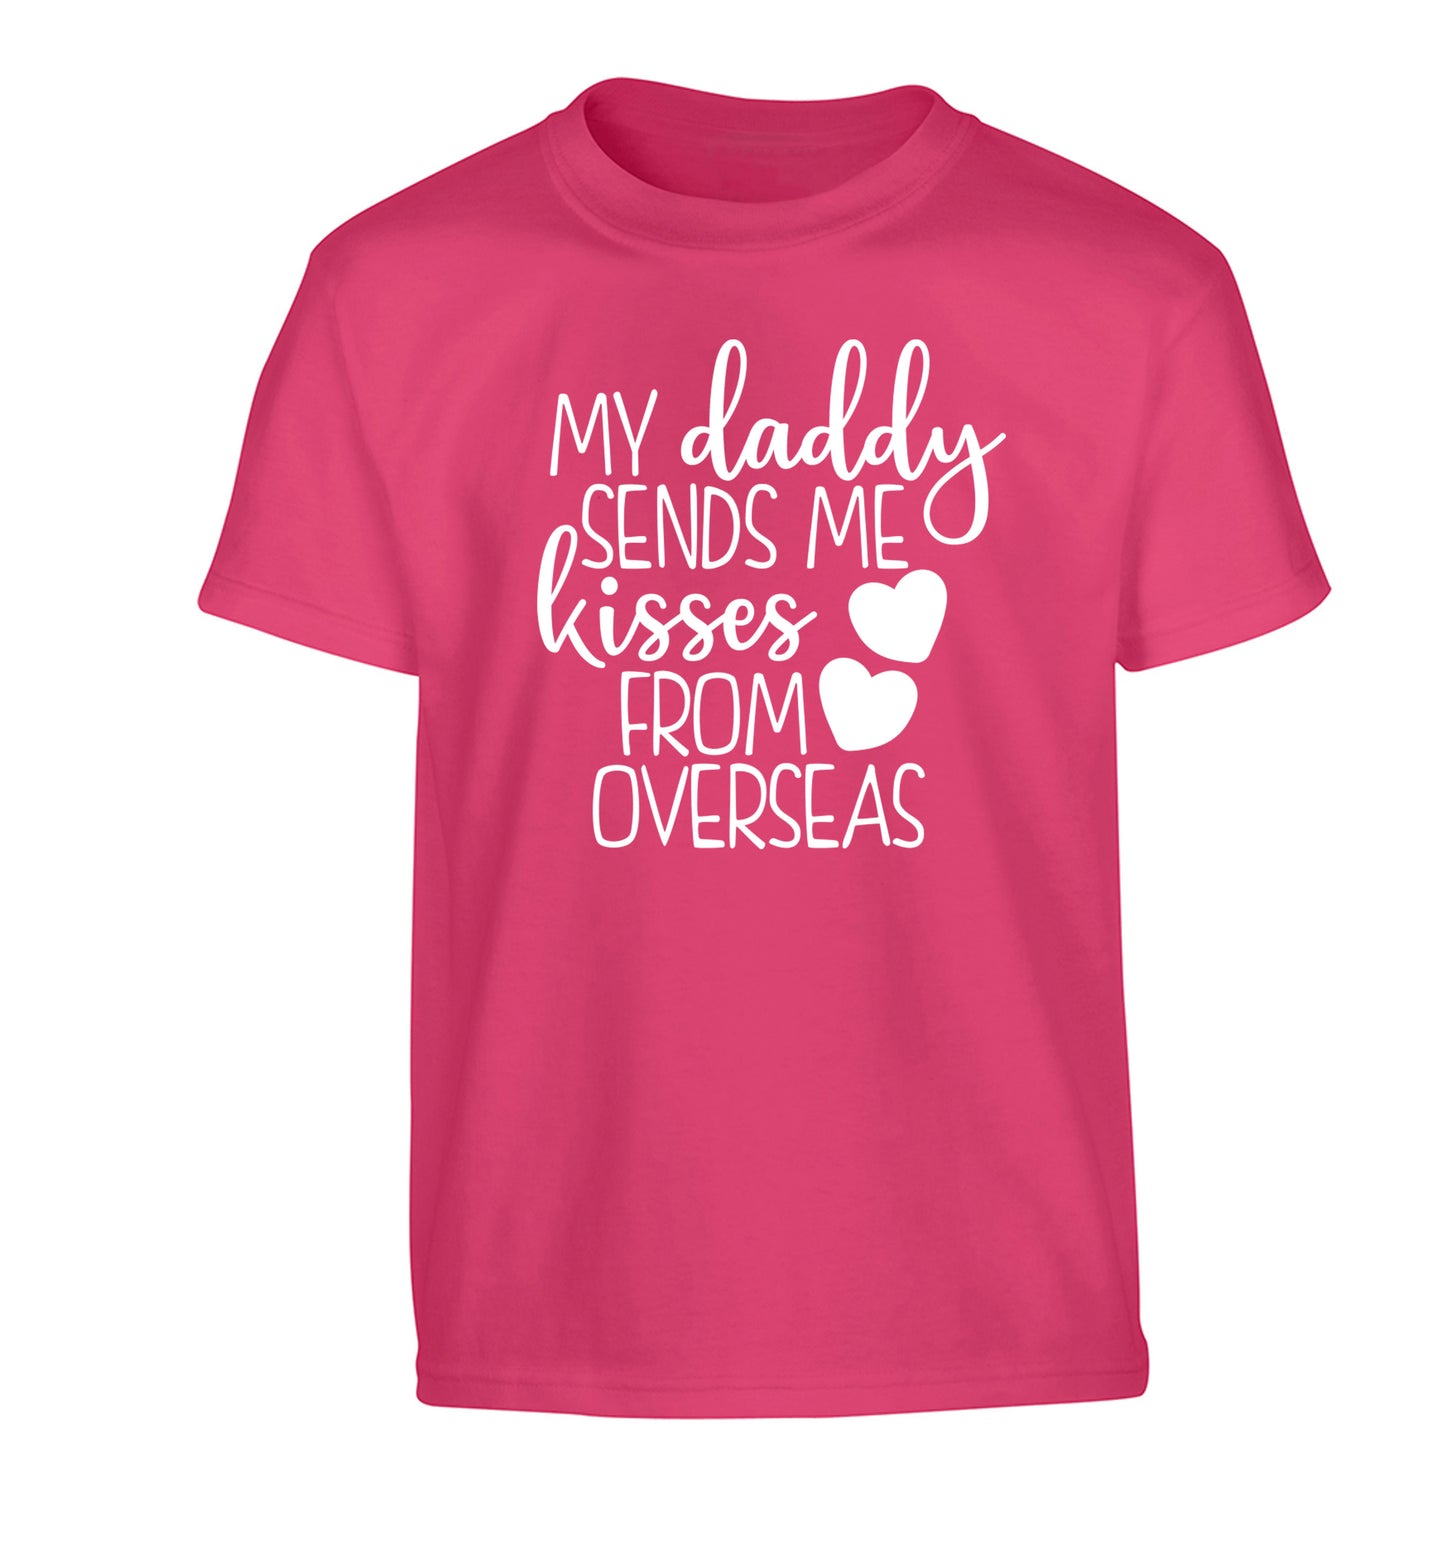 My daddy sends me kisses from overseas Children's pink Tshirt 12-13 Years